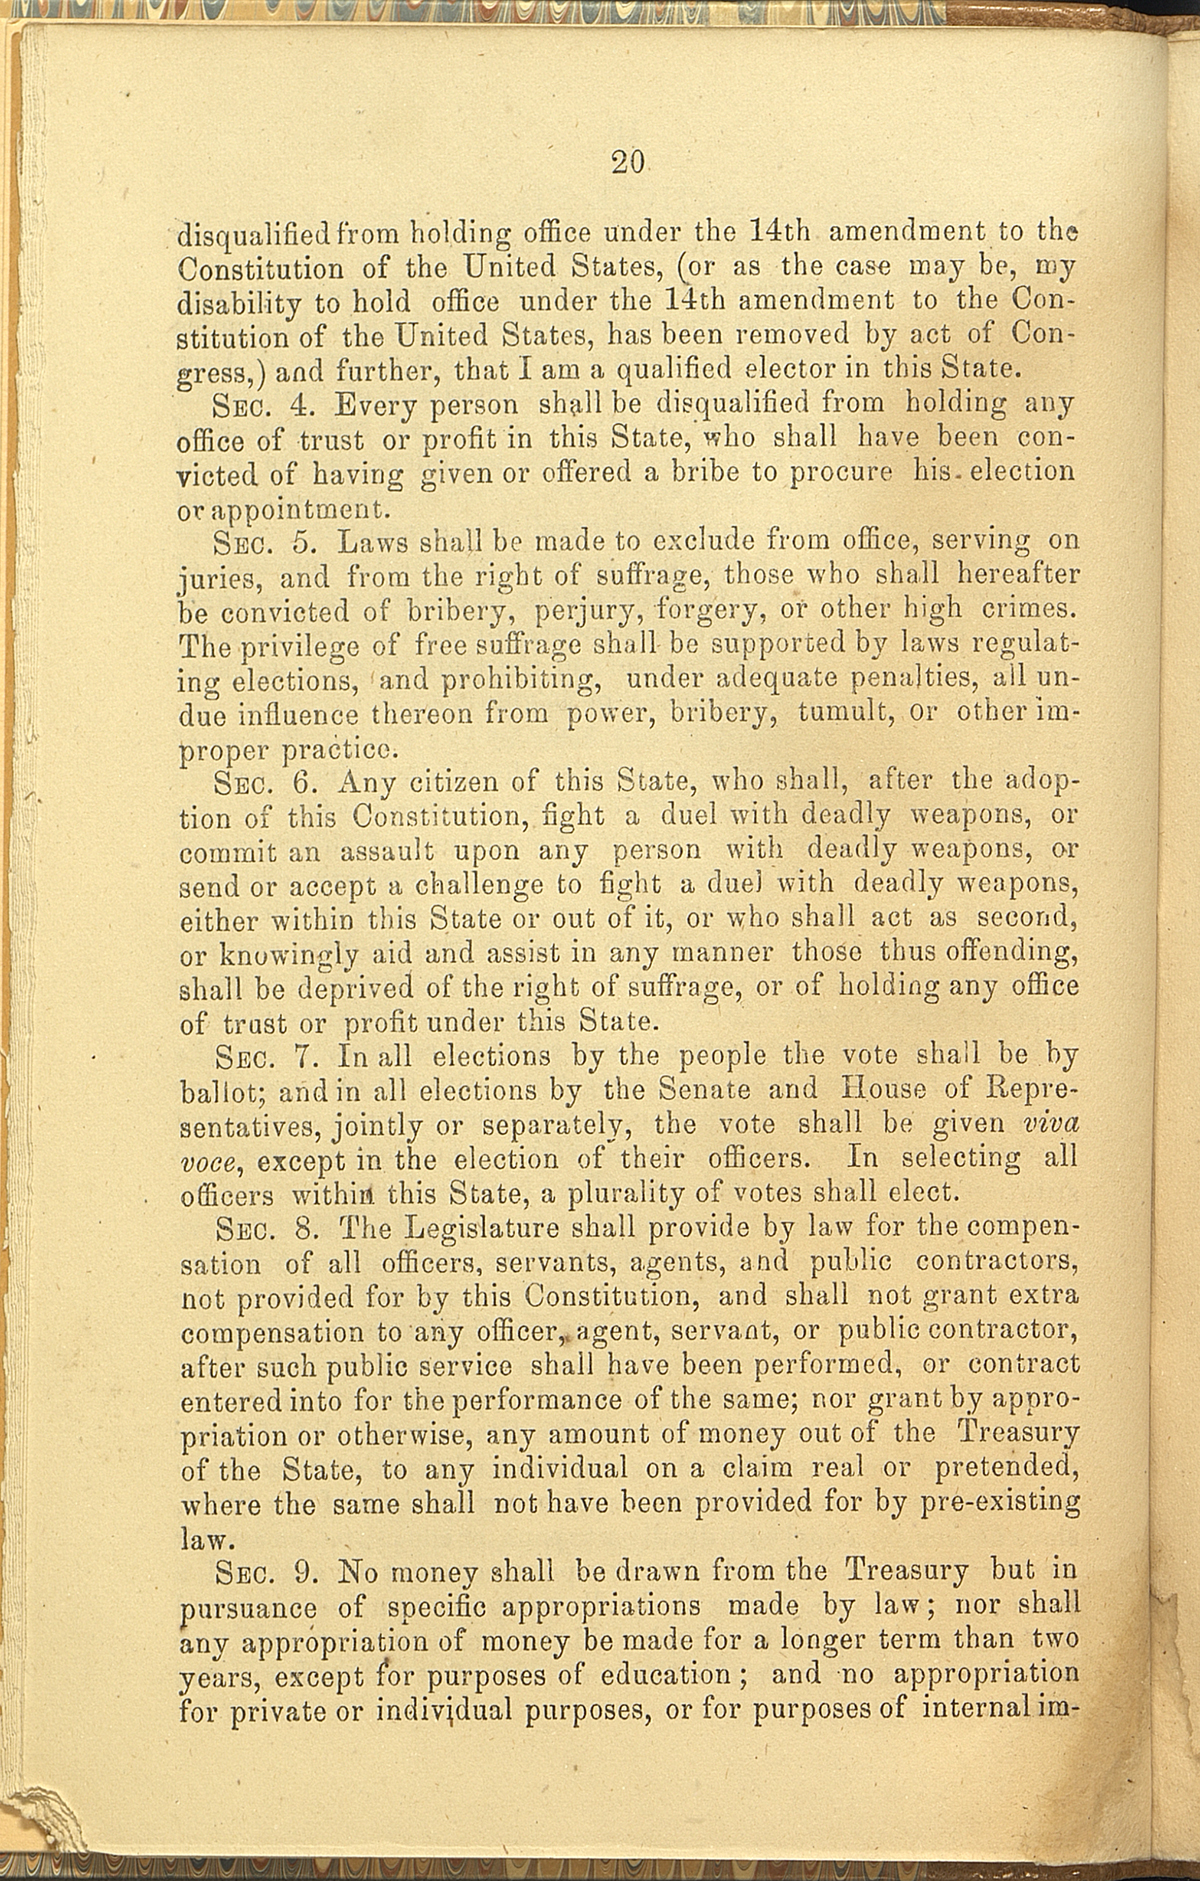 Article VII, Sections 3-9